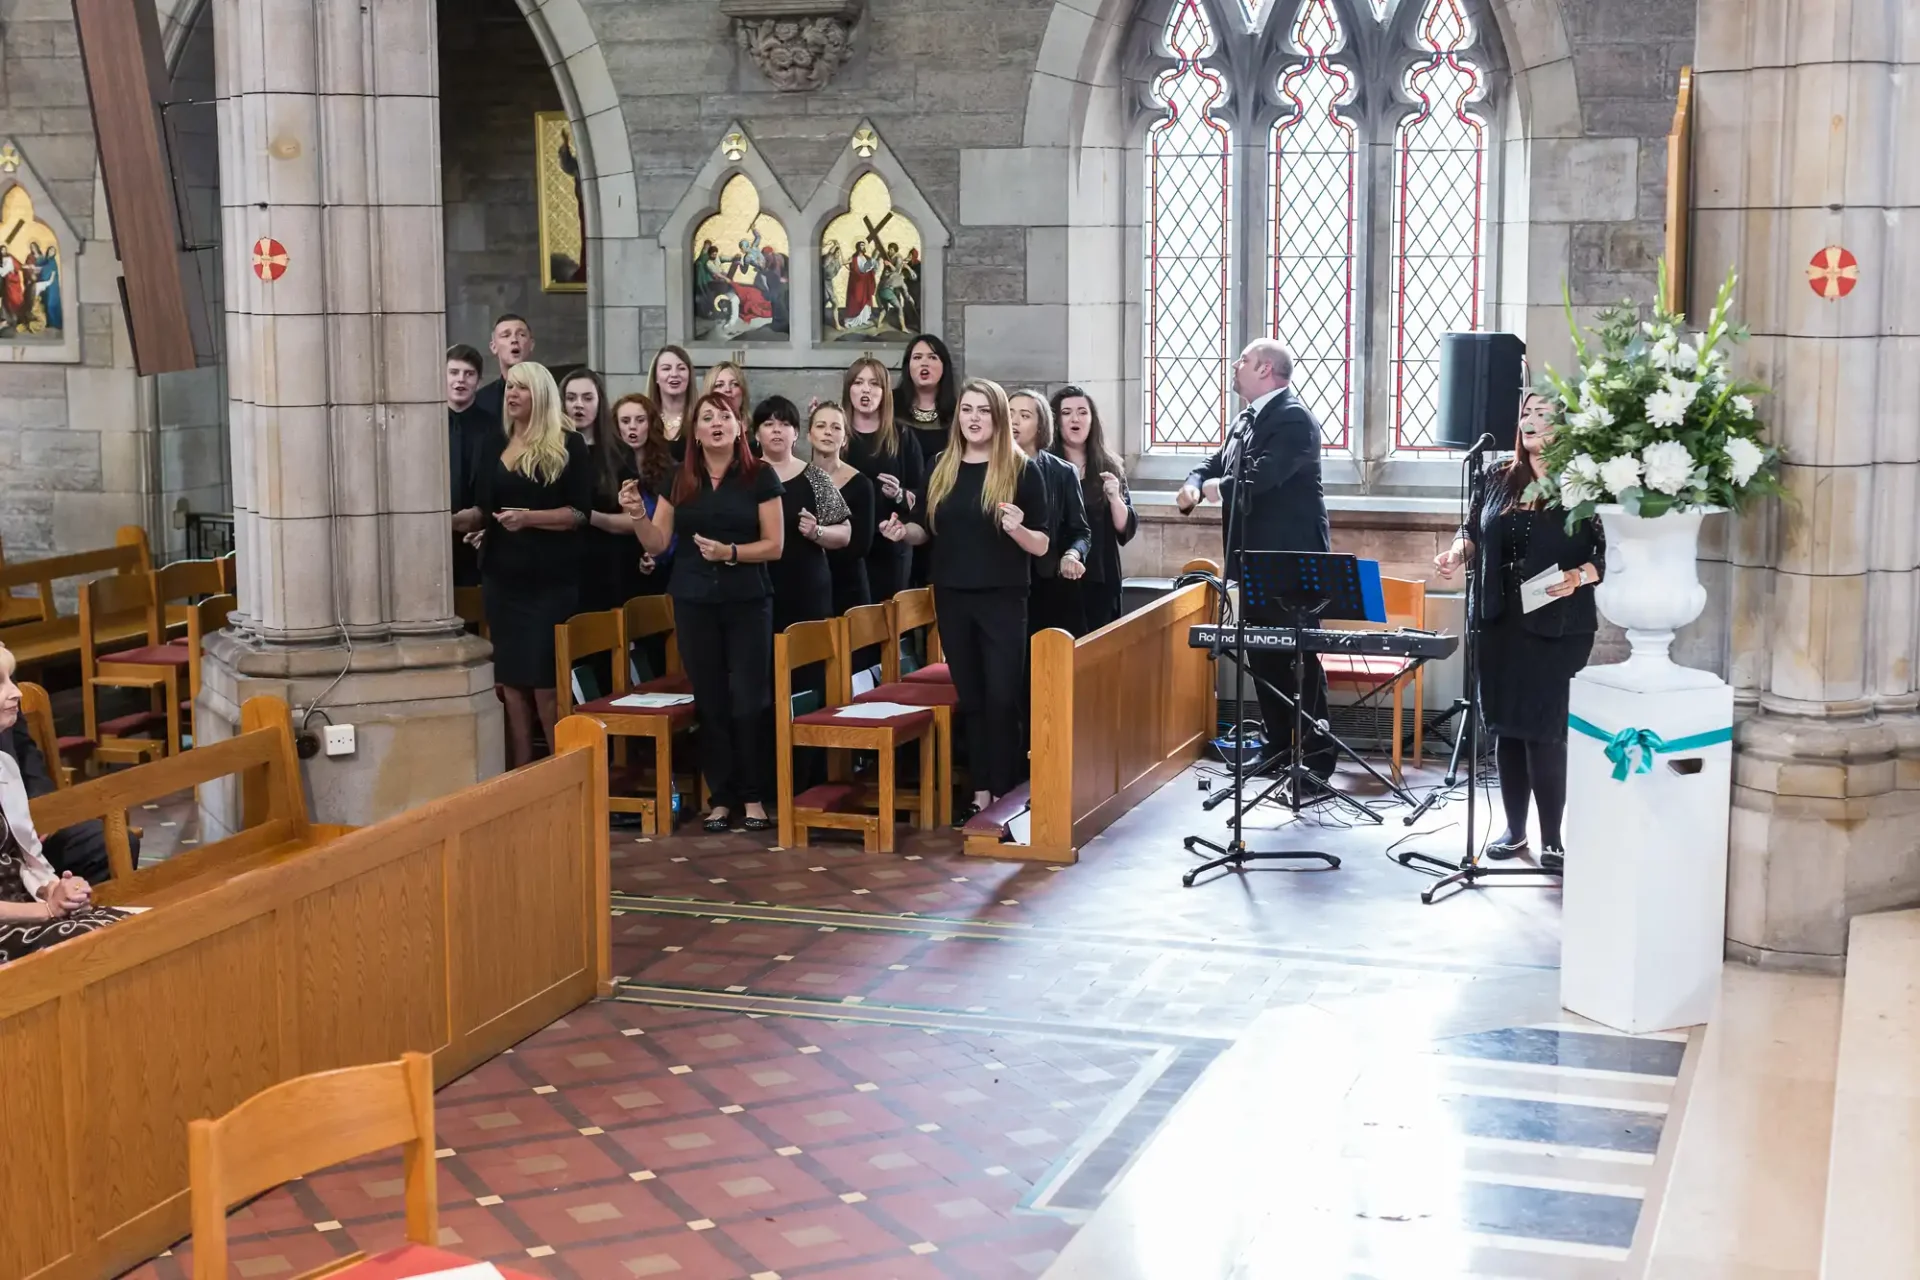 A choir performing in a church, accompanied by a conductor and a musician with a keyboard.